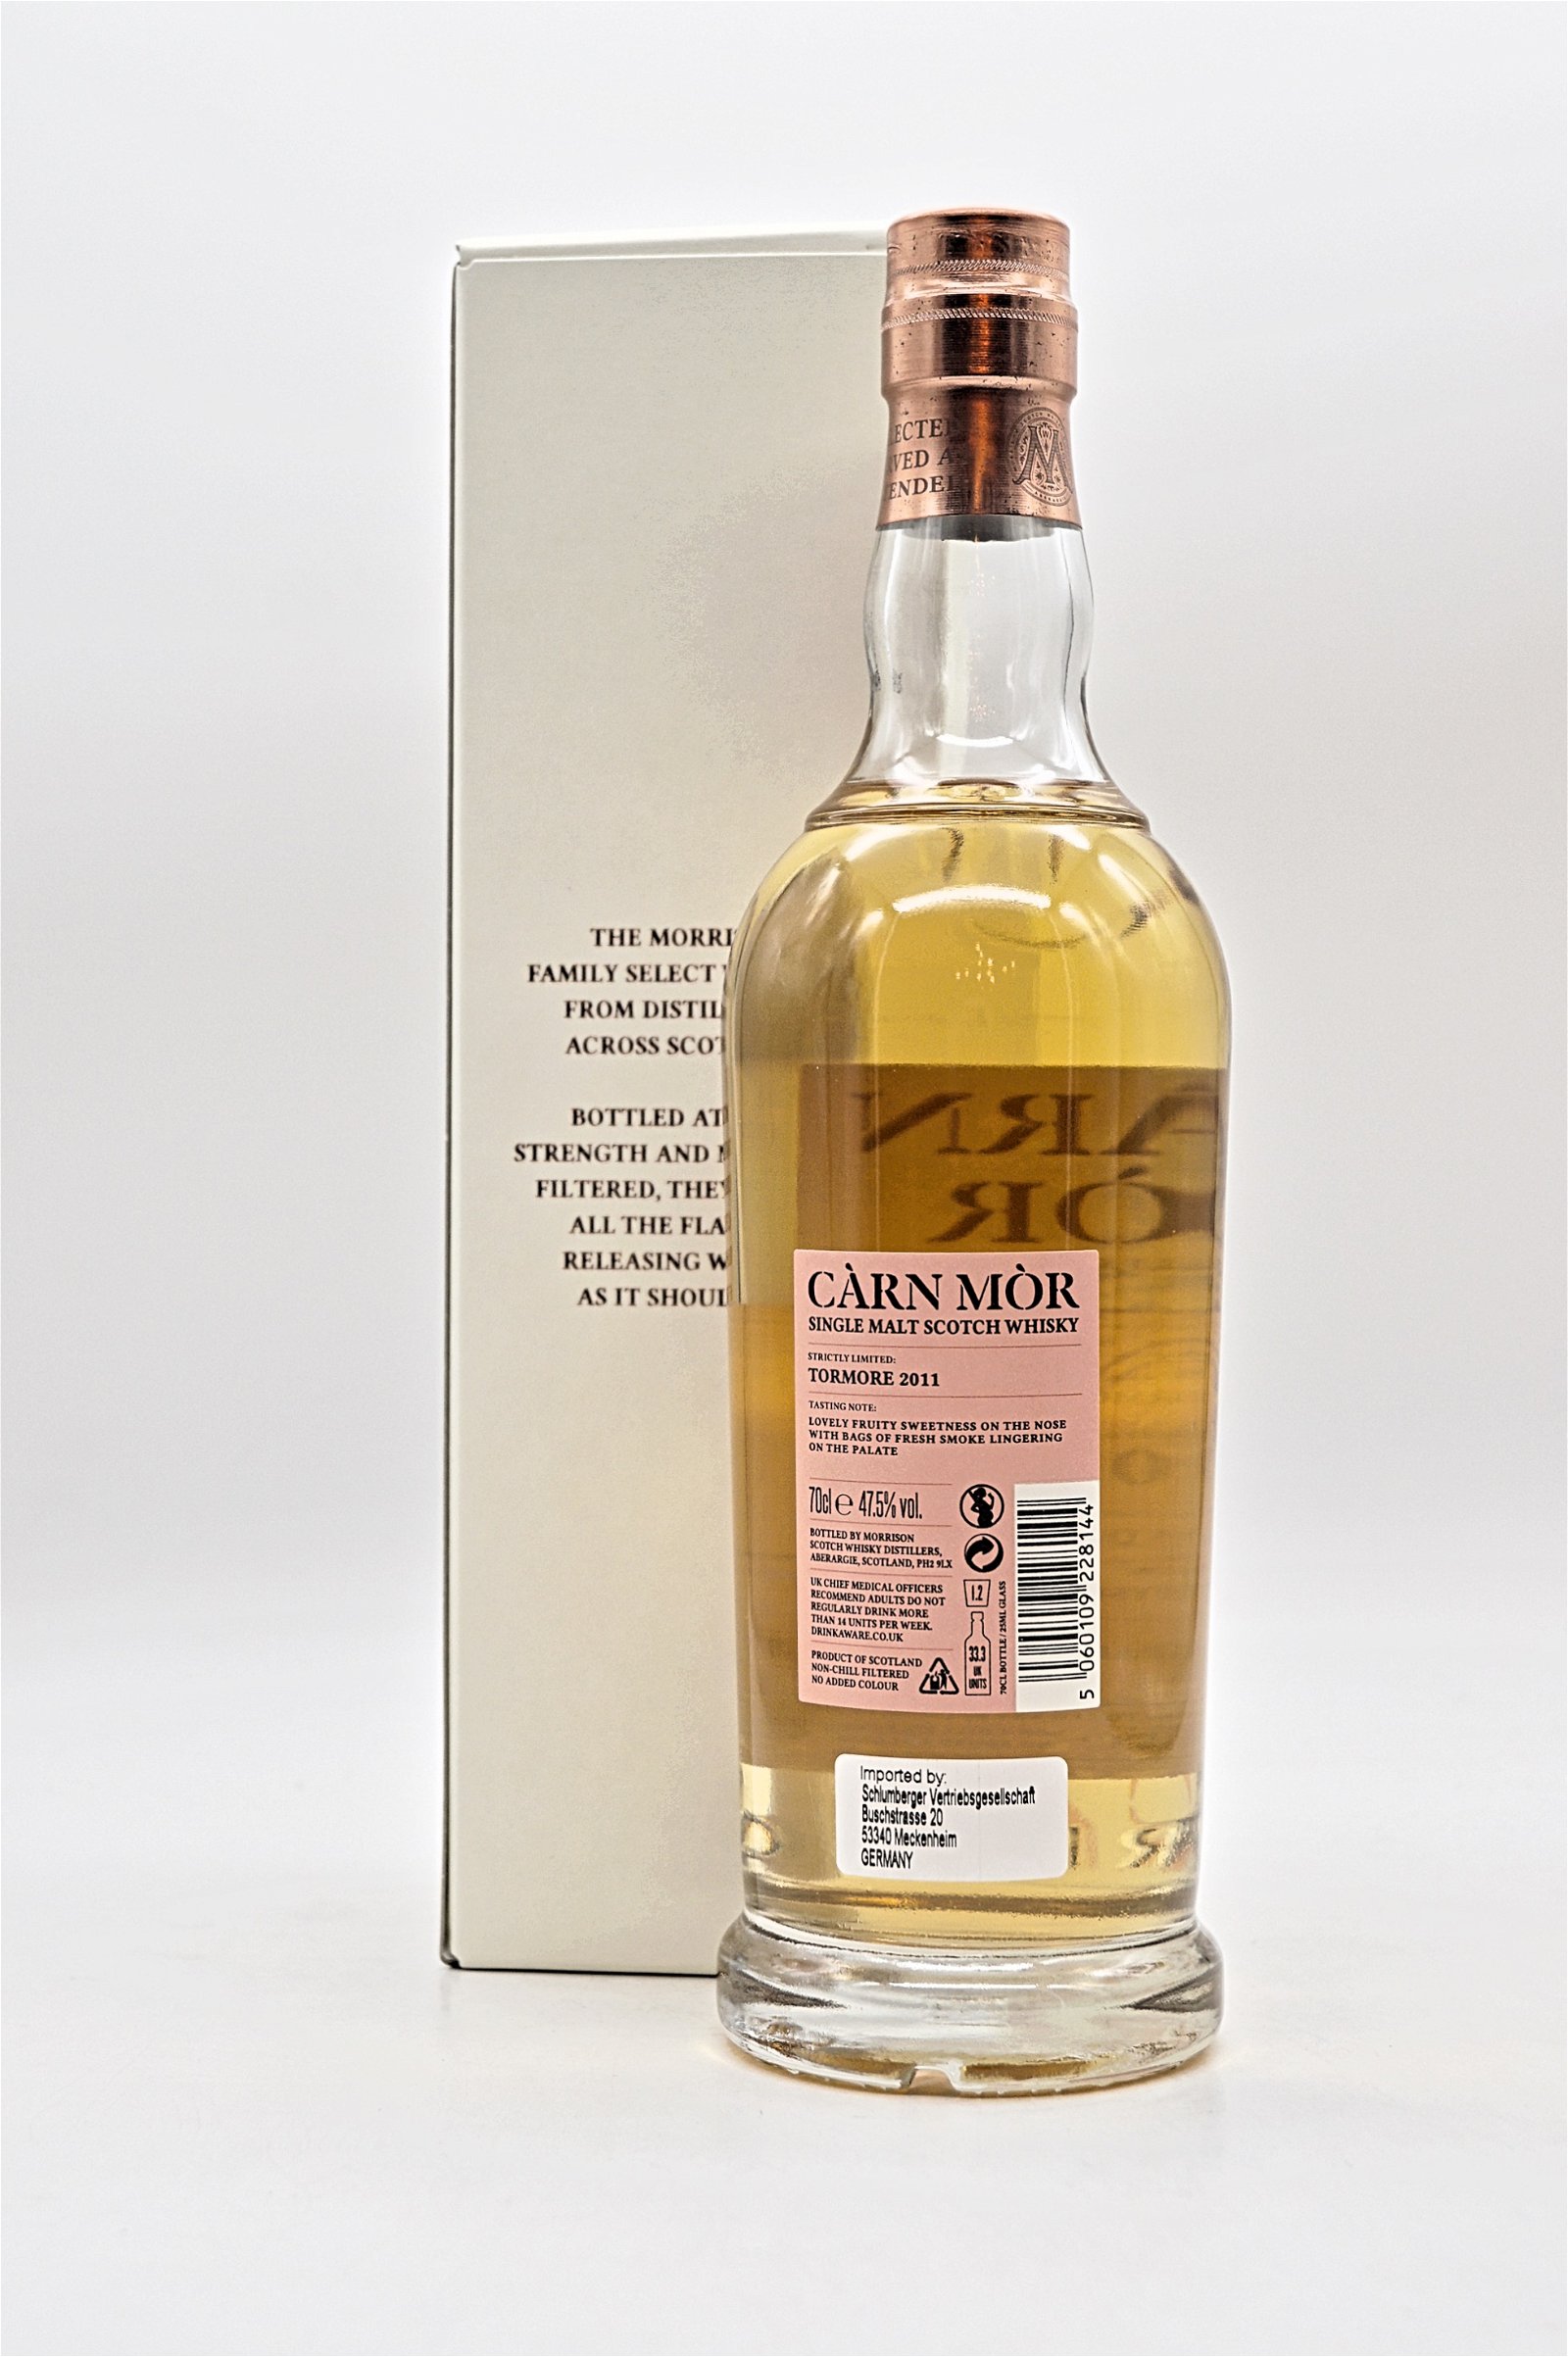 Carn Mor Tormore 2011 Peated Cask Strictly Limited Single Malt Scotch Whisky